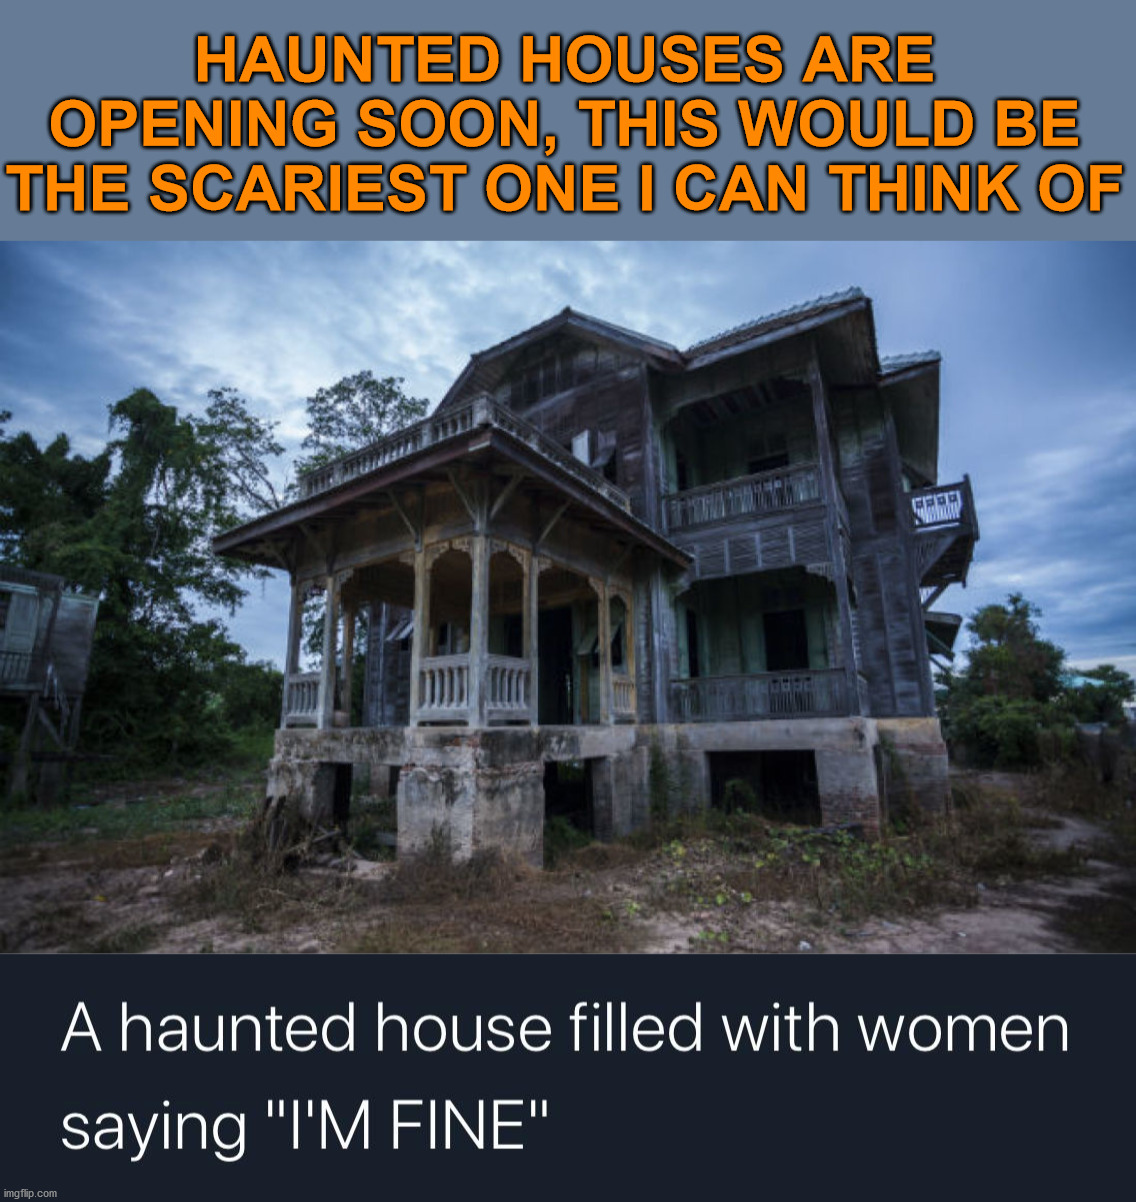 Makes me shake in my shoes to even think about it. | HAUNTED HOUSES ARE OPENING SOON, THIS WOULD BE THE SCARIEST ONE I CAN THINK OF | image tagged in haunted house,i'm fine,women,scary | made w/ Imgflip meme maker